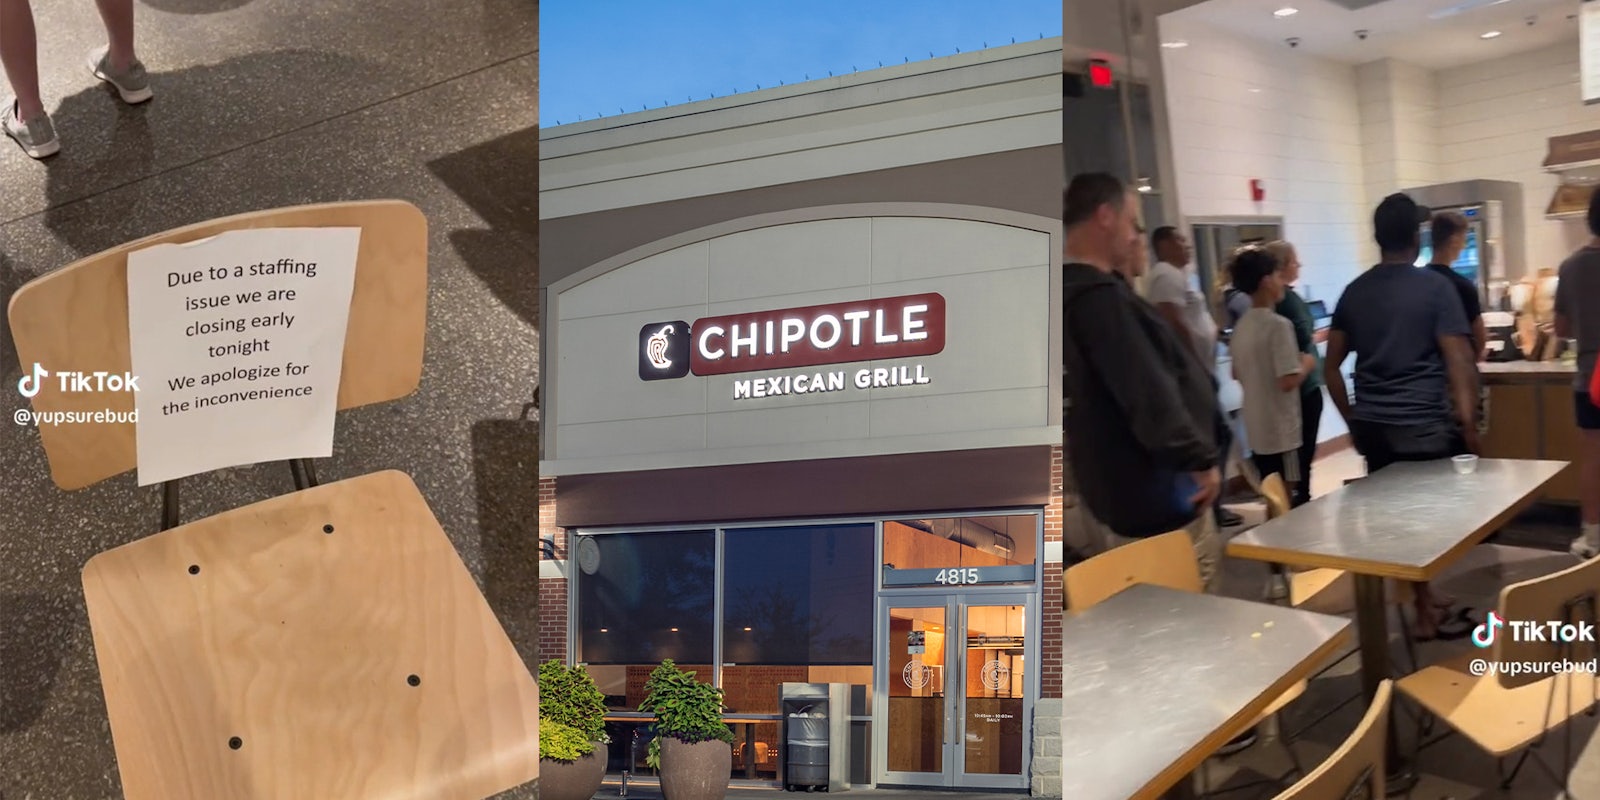 Chipotle tries to close early when they're understaffed. But customers keep coming in